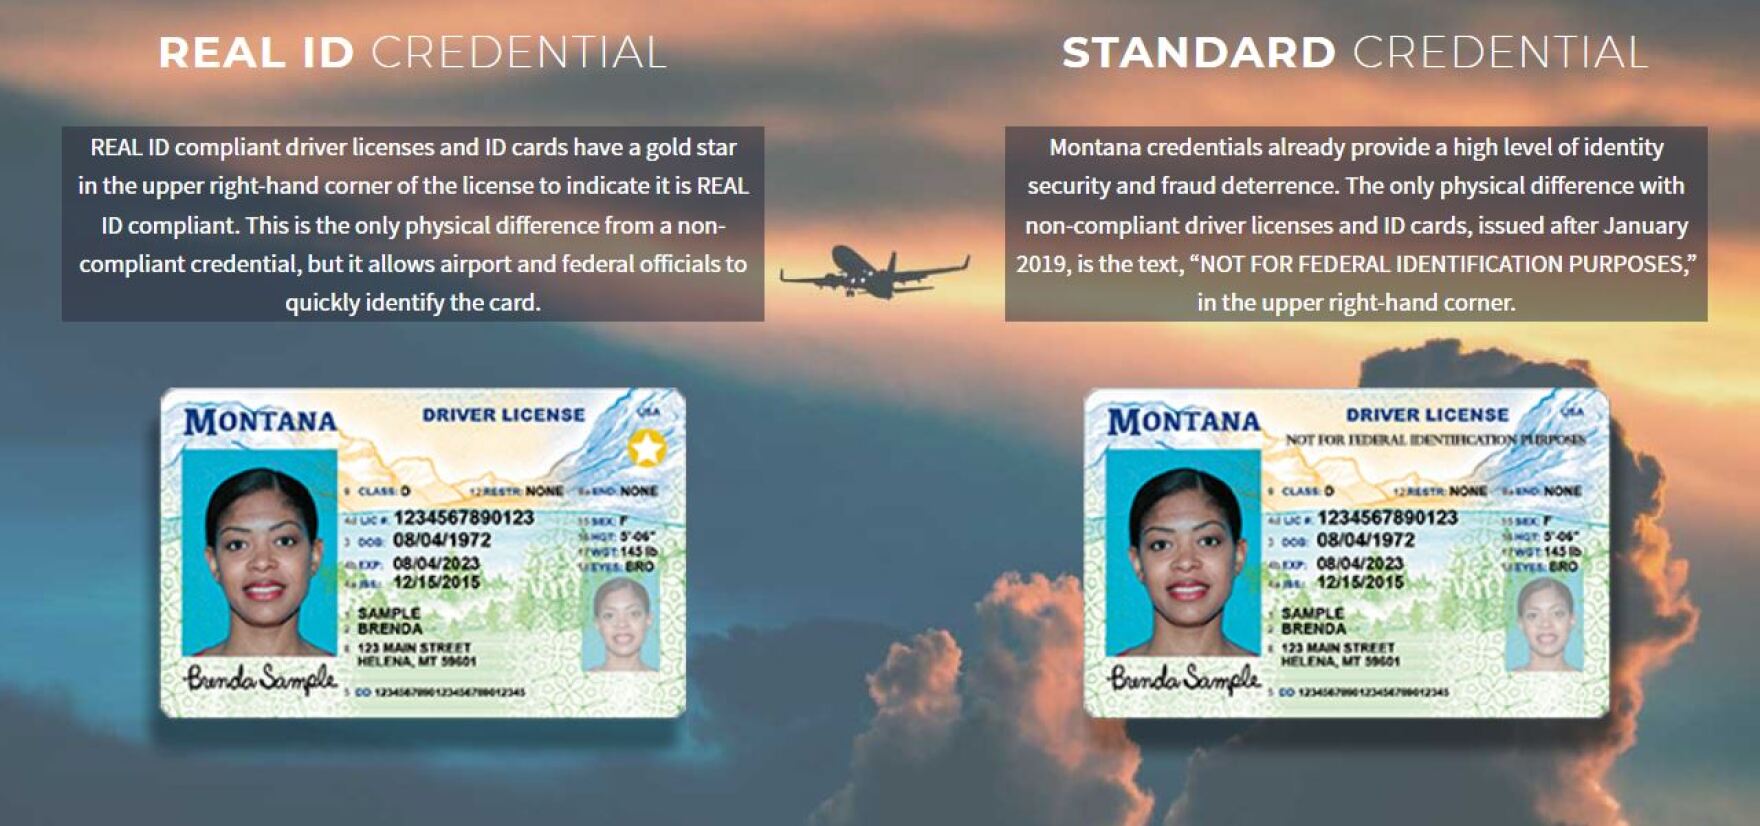 MassDOT - REAL ID is a Federal Security Standard for IDs that was created  in 2005 as a result of 9/11. It is an additional layer of security for MA  driver's licenses